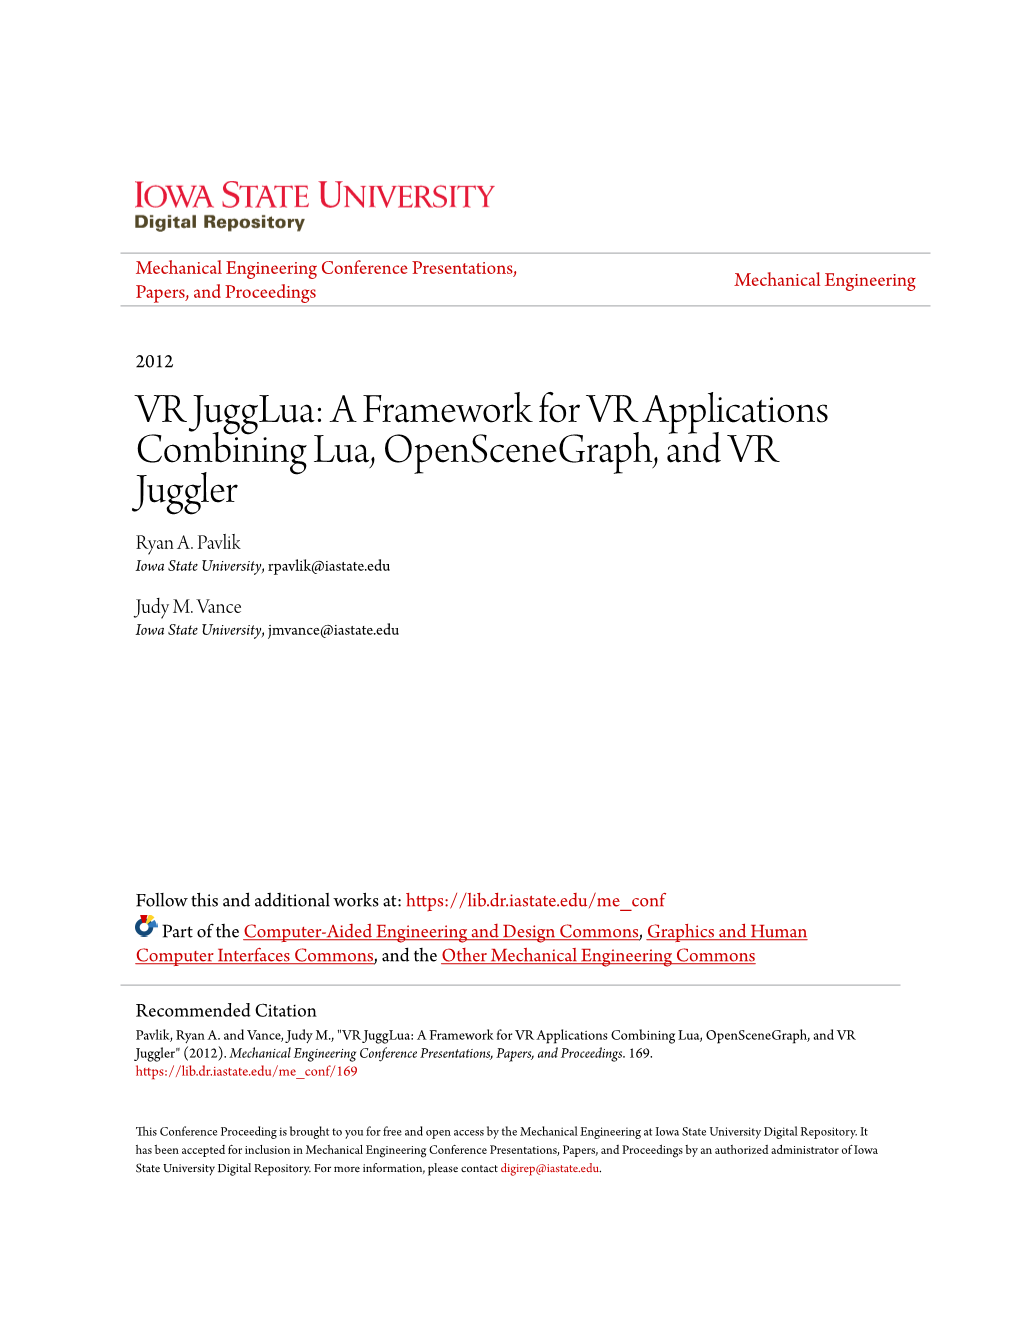 A Framework for VR Applications Combining Lua, Openscenegraph, and VR Juggler Ryan A